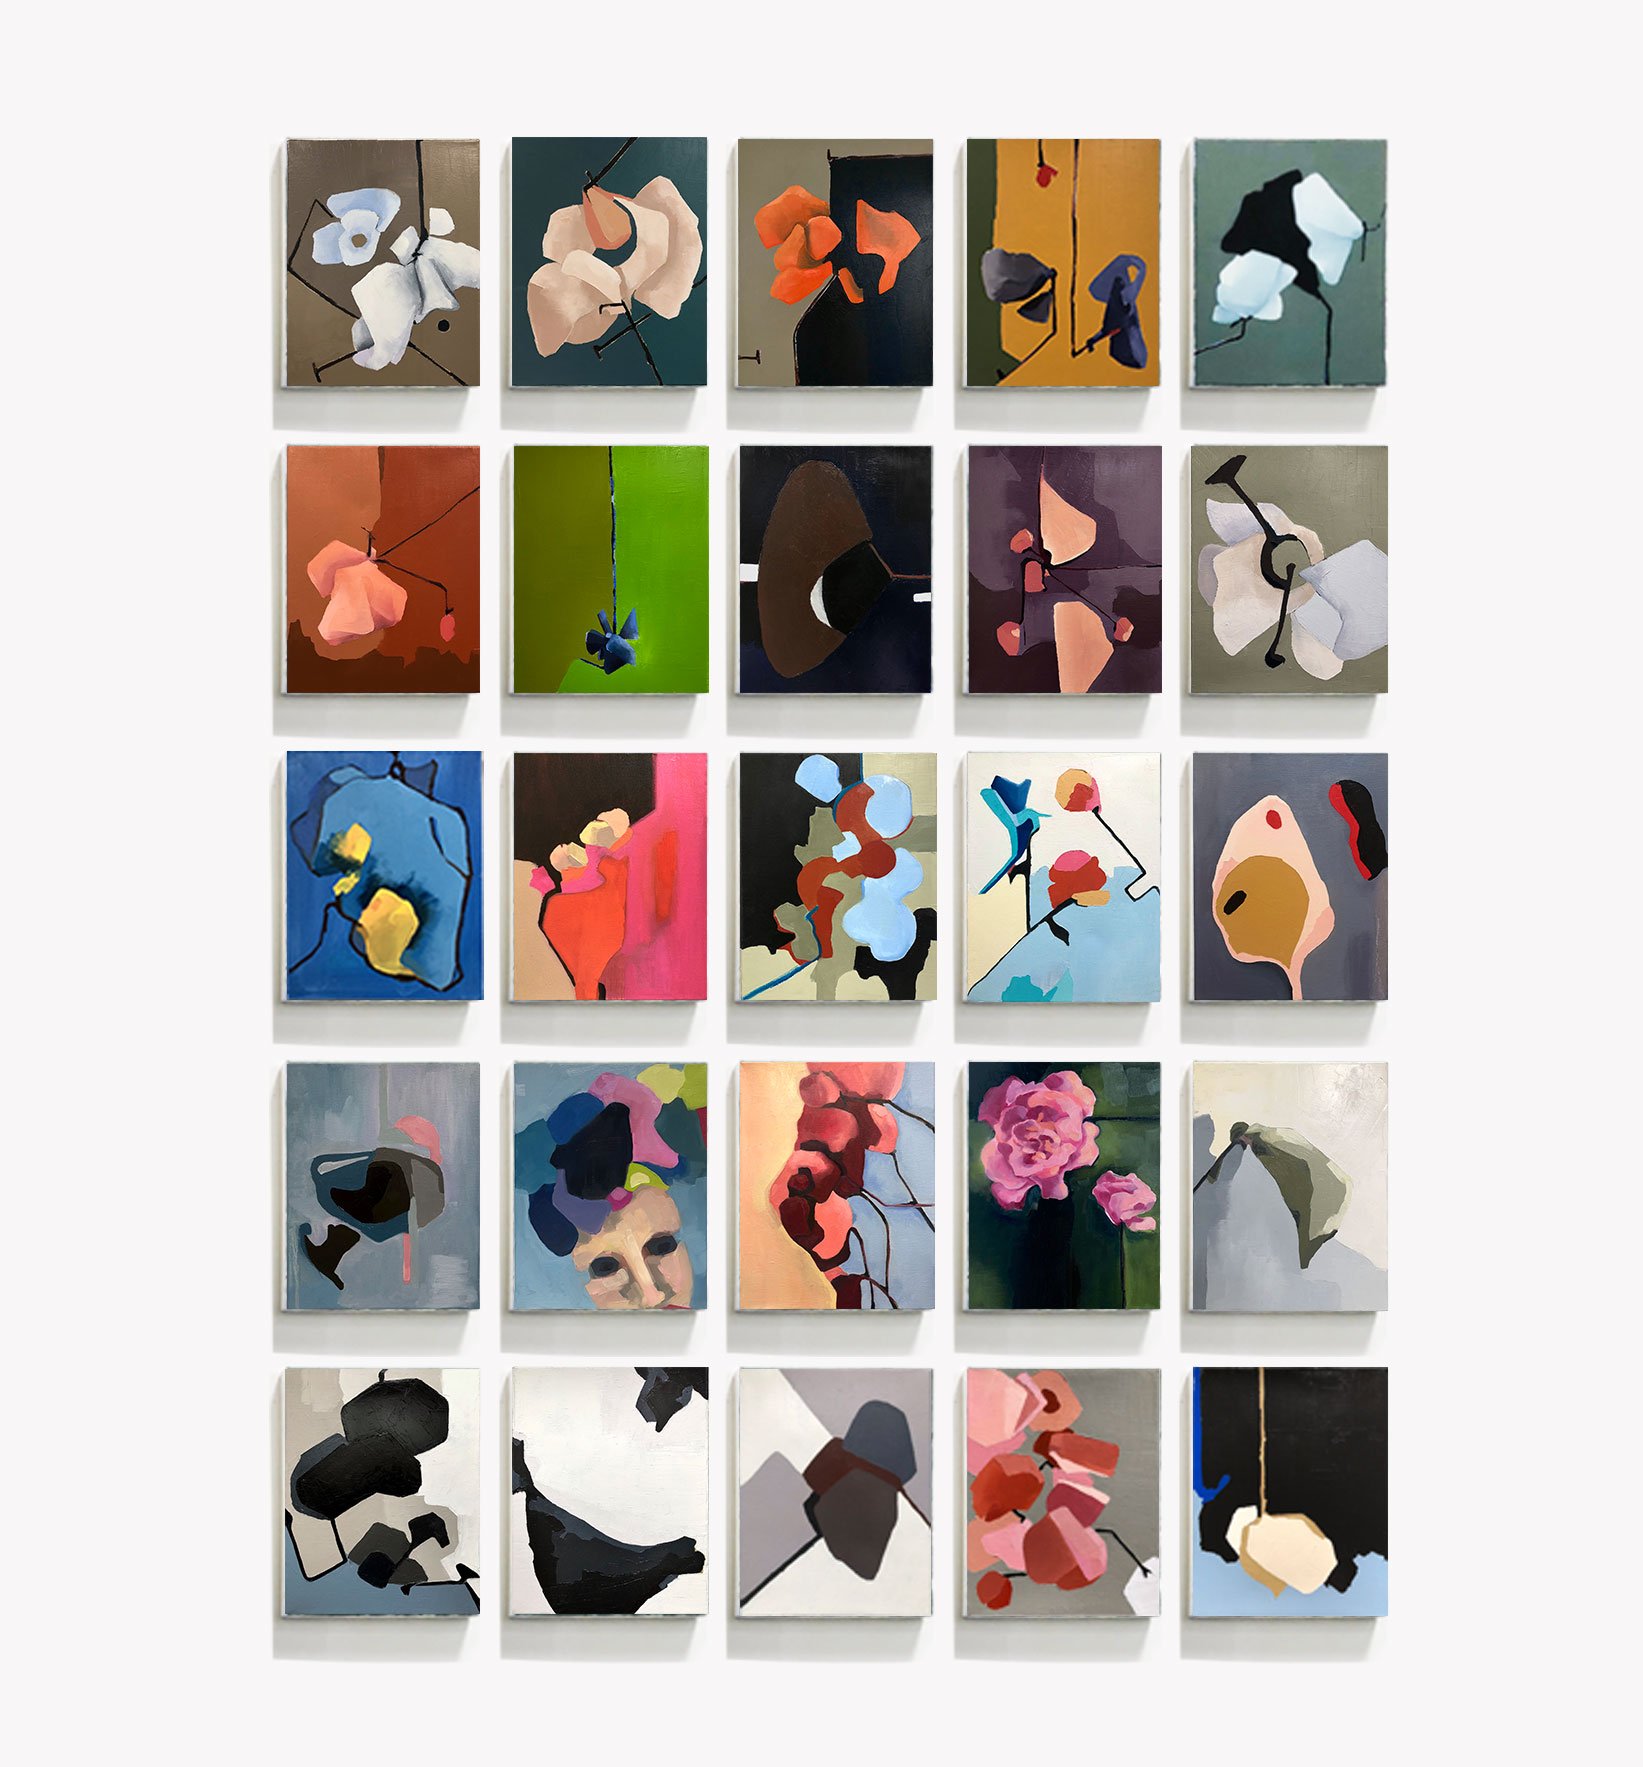   The 25 Series, 25 paintings . Oil on canvas, 2019-2020, 14 x 11 inches. 